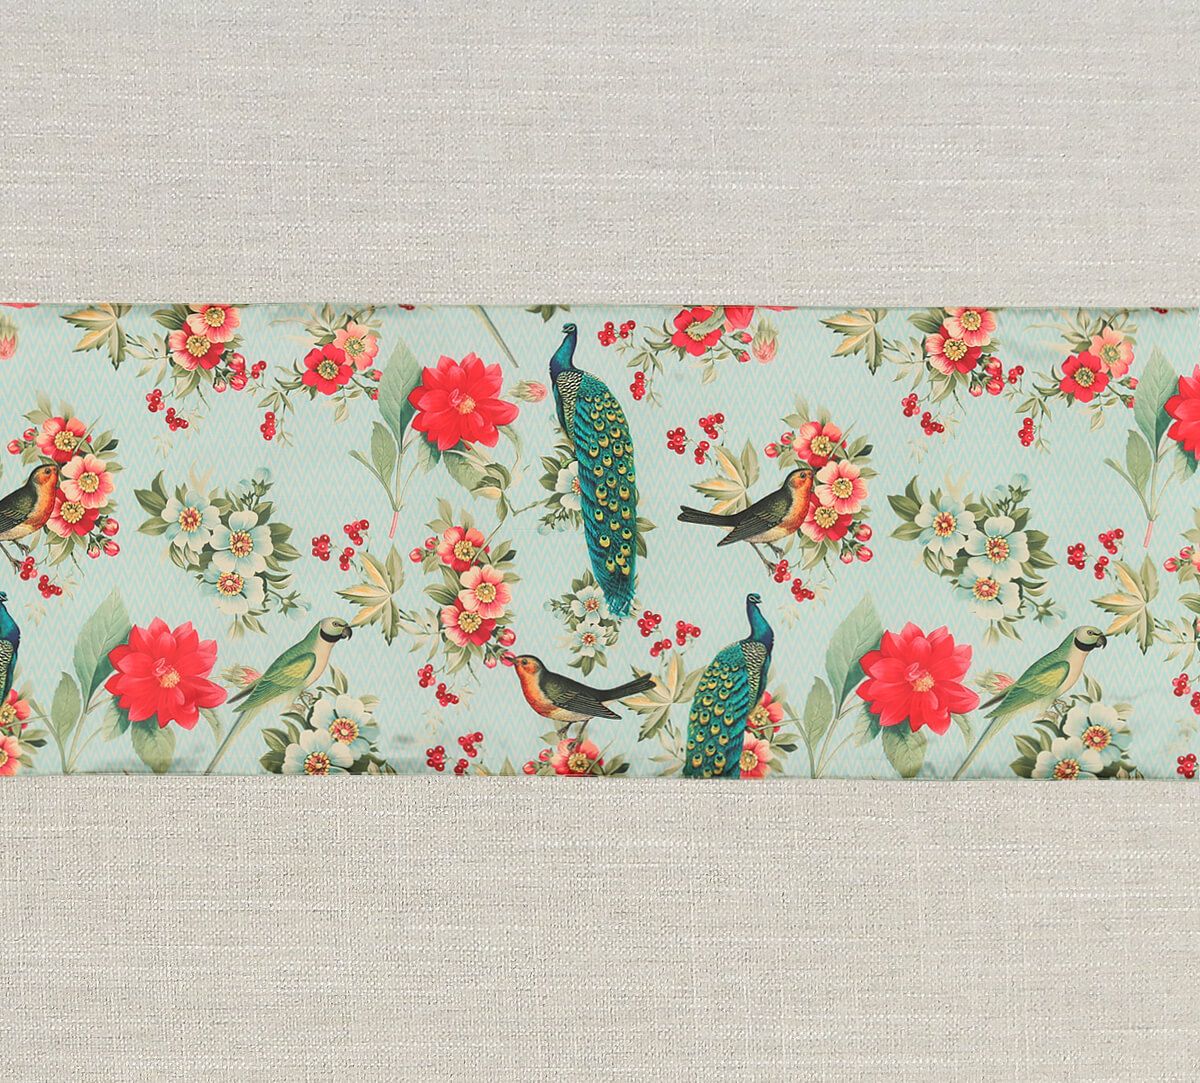 India Circus by Krsnaa Mehta Feathered Garden Bed and Table Runner